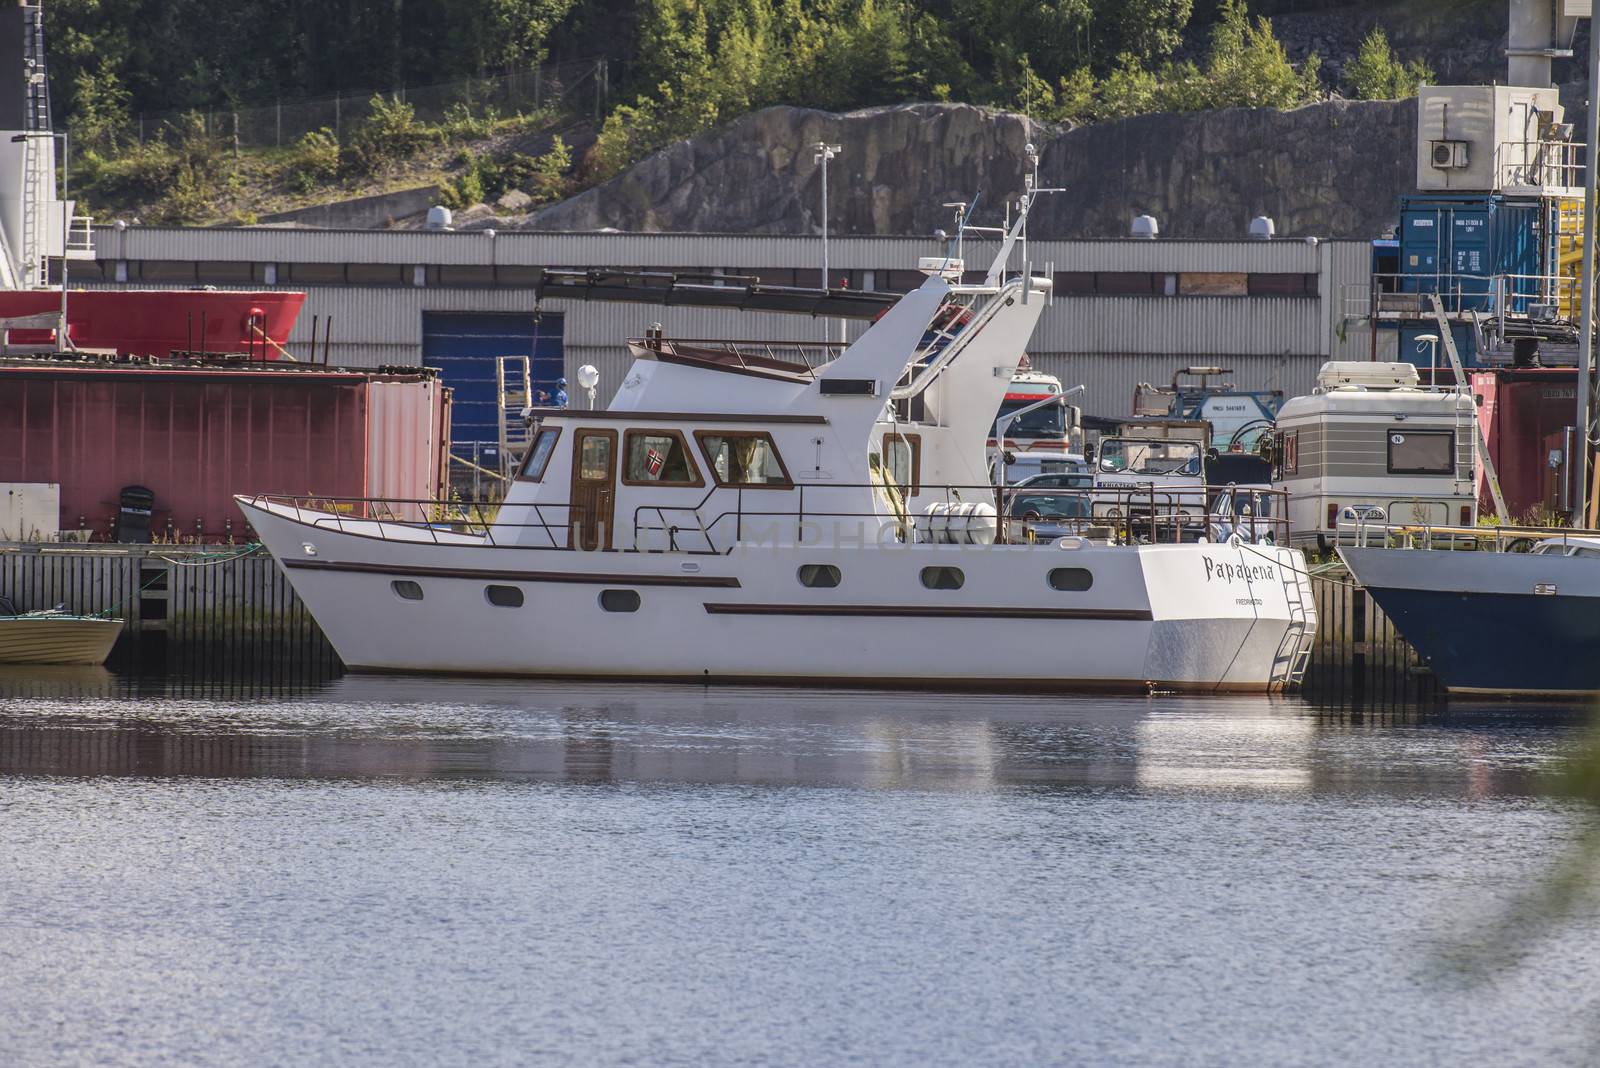 The boat is moored to the dock at the port of Halden, Norway and built of steel